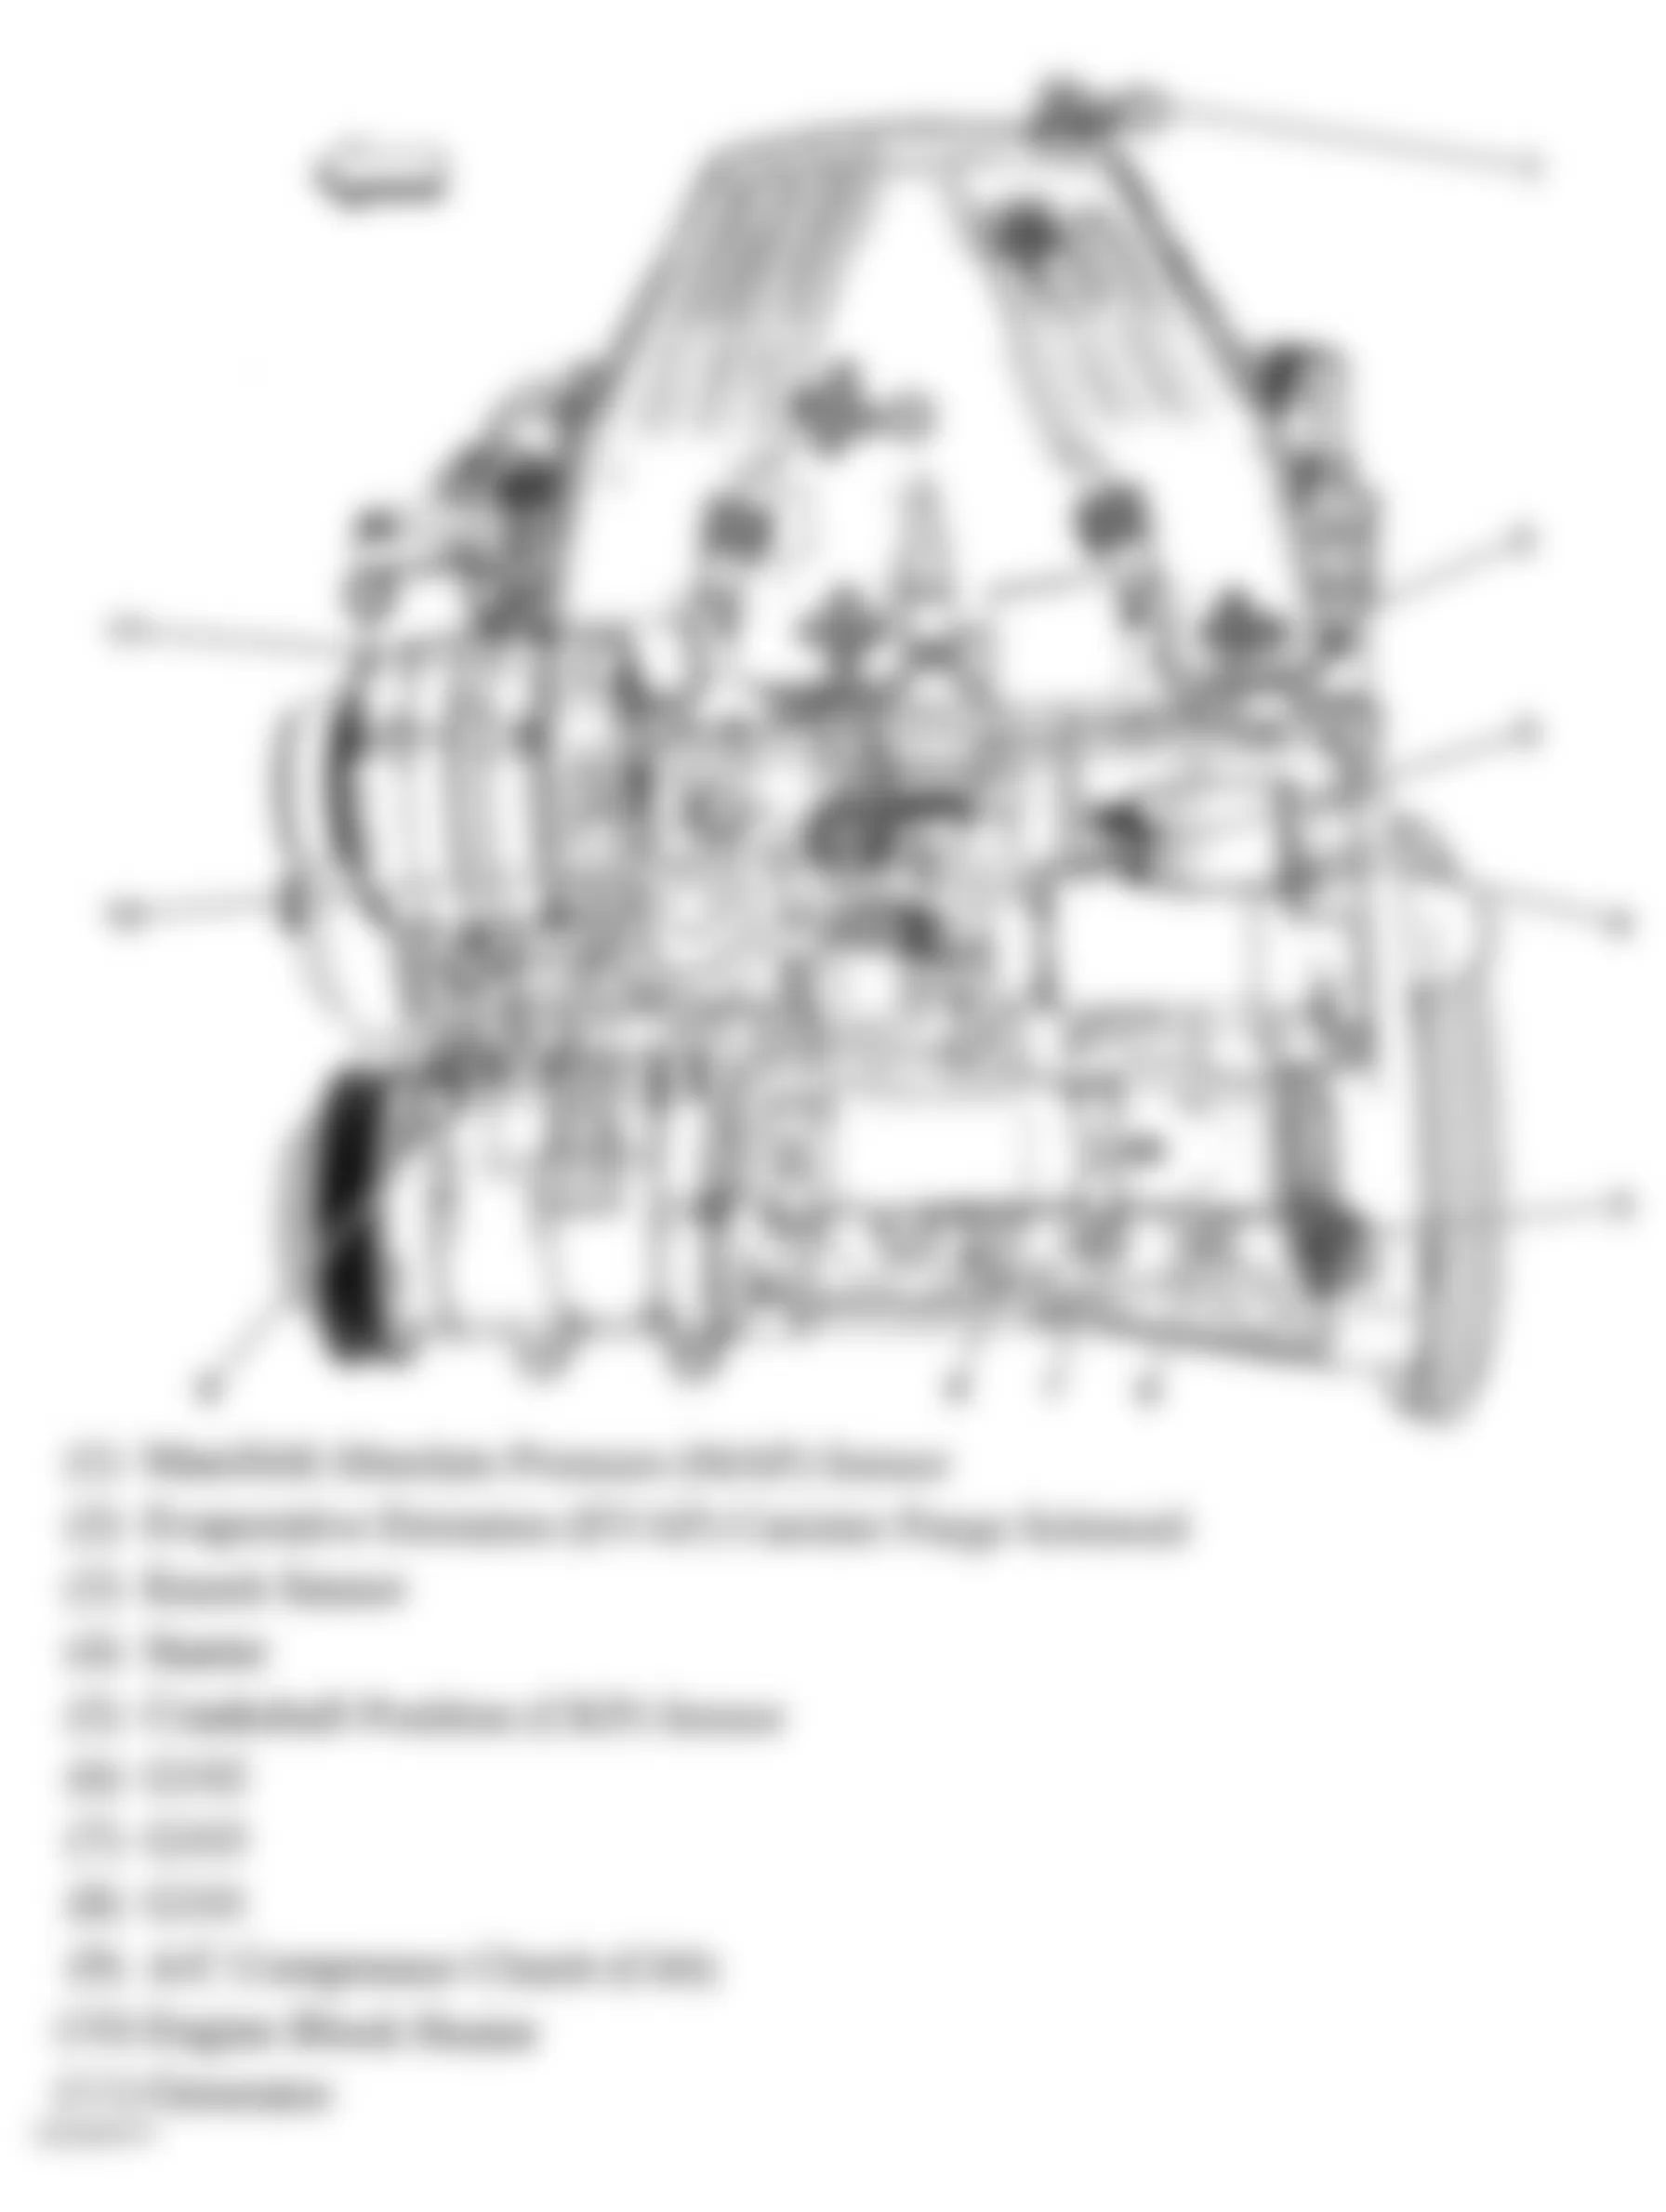 GMC Canyon 2005 - Component Locations -  Top View Of Engine (2.8L)